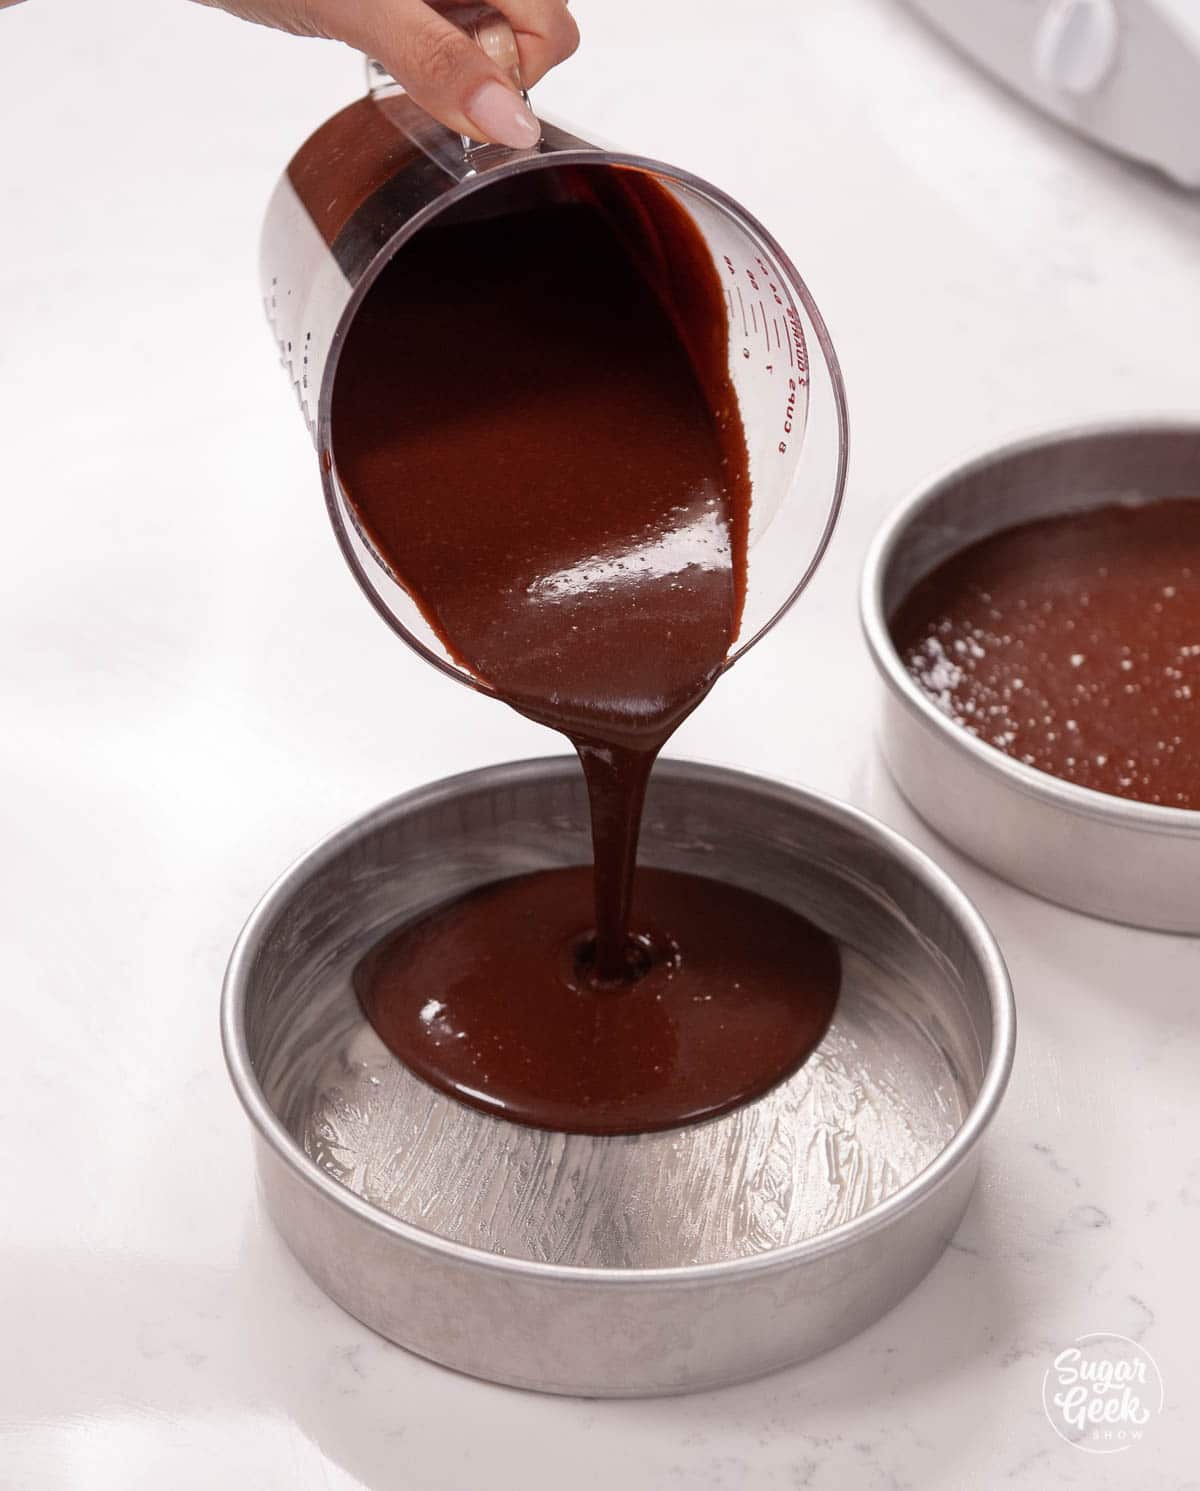 pouring chocolate batter into cake pans